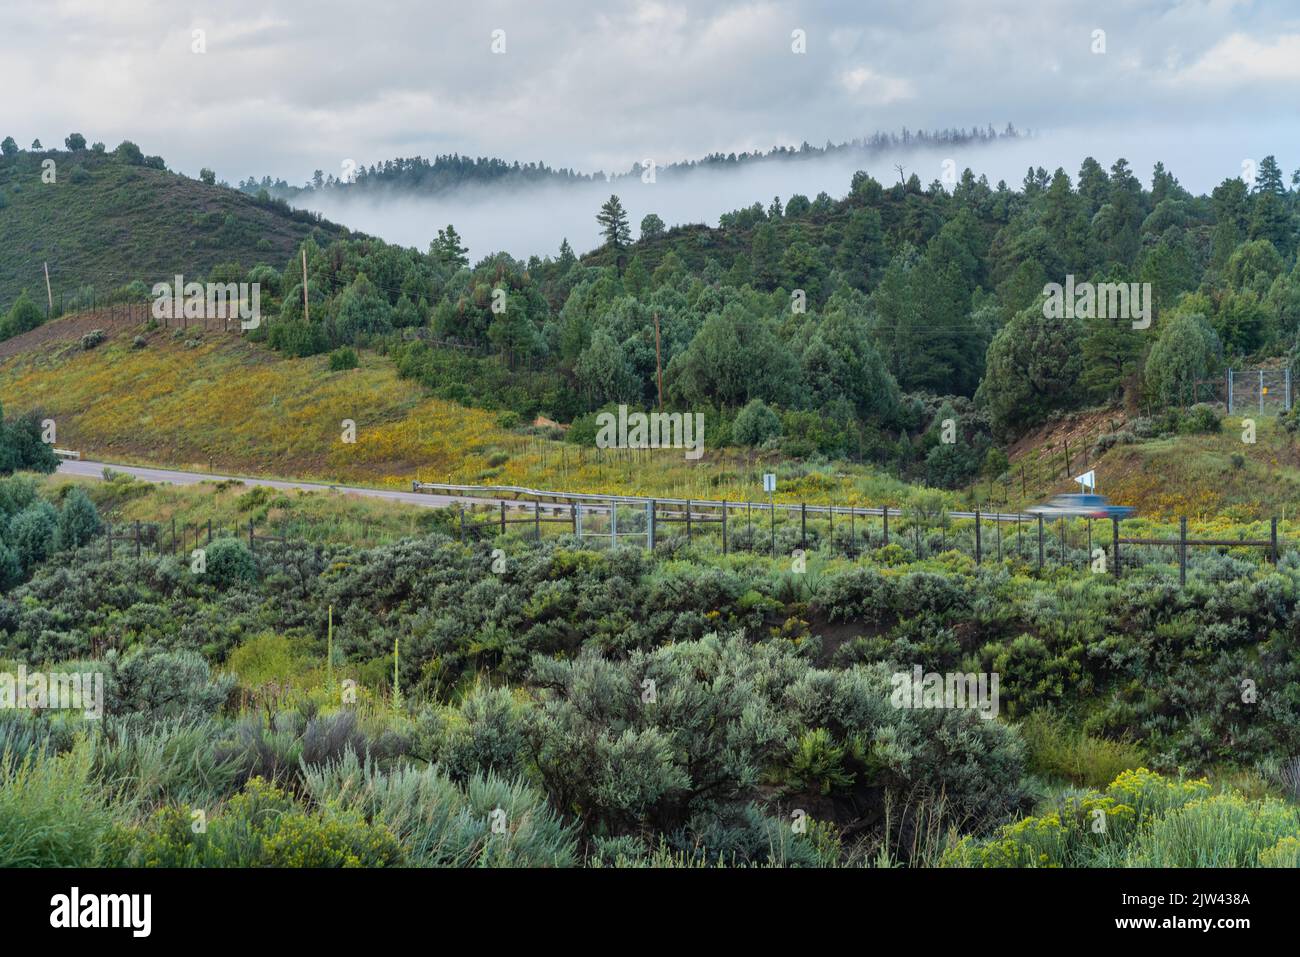 A car traveling through the mountains on Highway 64, early morning fog rising out of the canyon, sagebrush in the foreground. Stock Photo